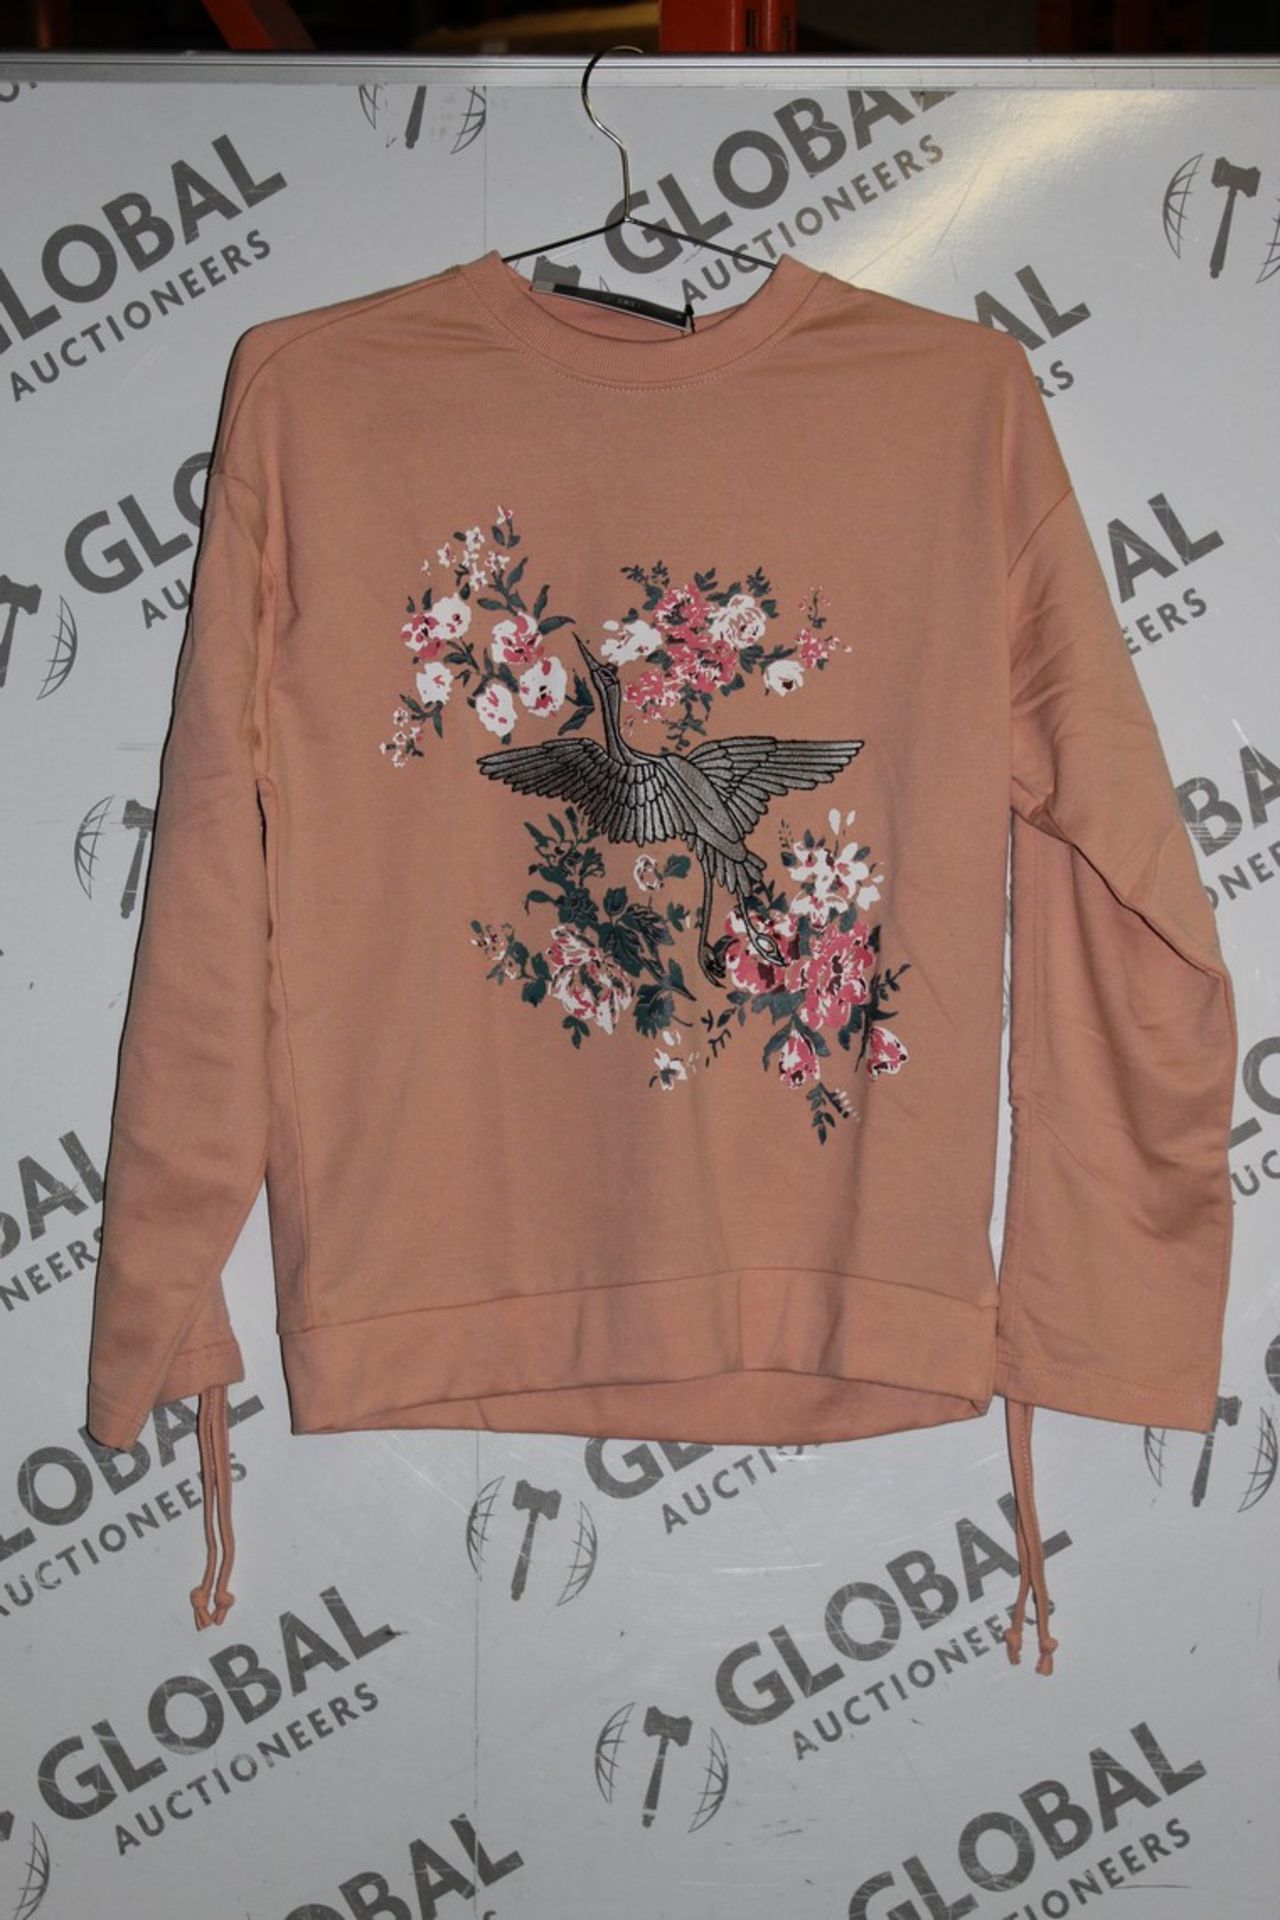 Lot to Contain 25 Brand New House Marley Rose Blush Pink Girls Jumpers RRP £14.99 Each Combined